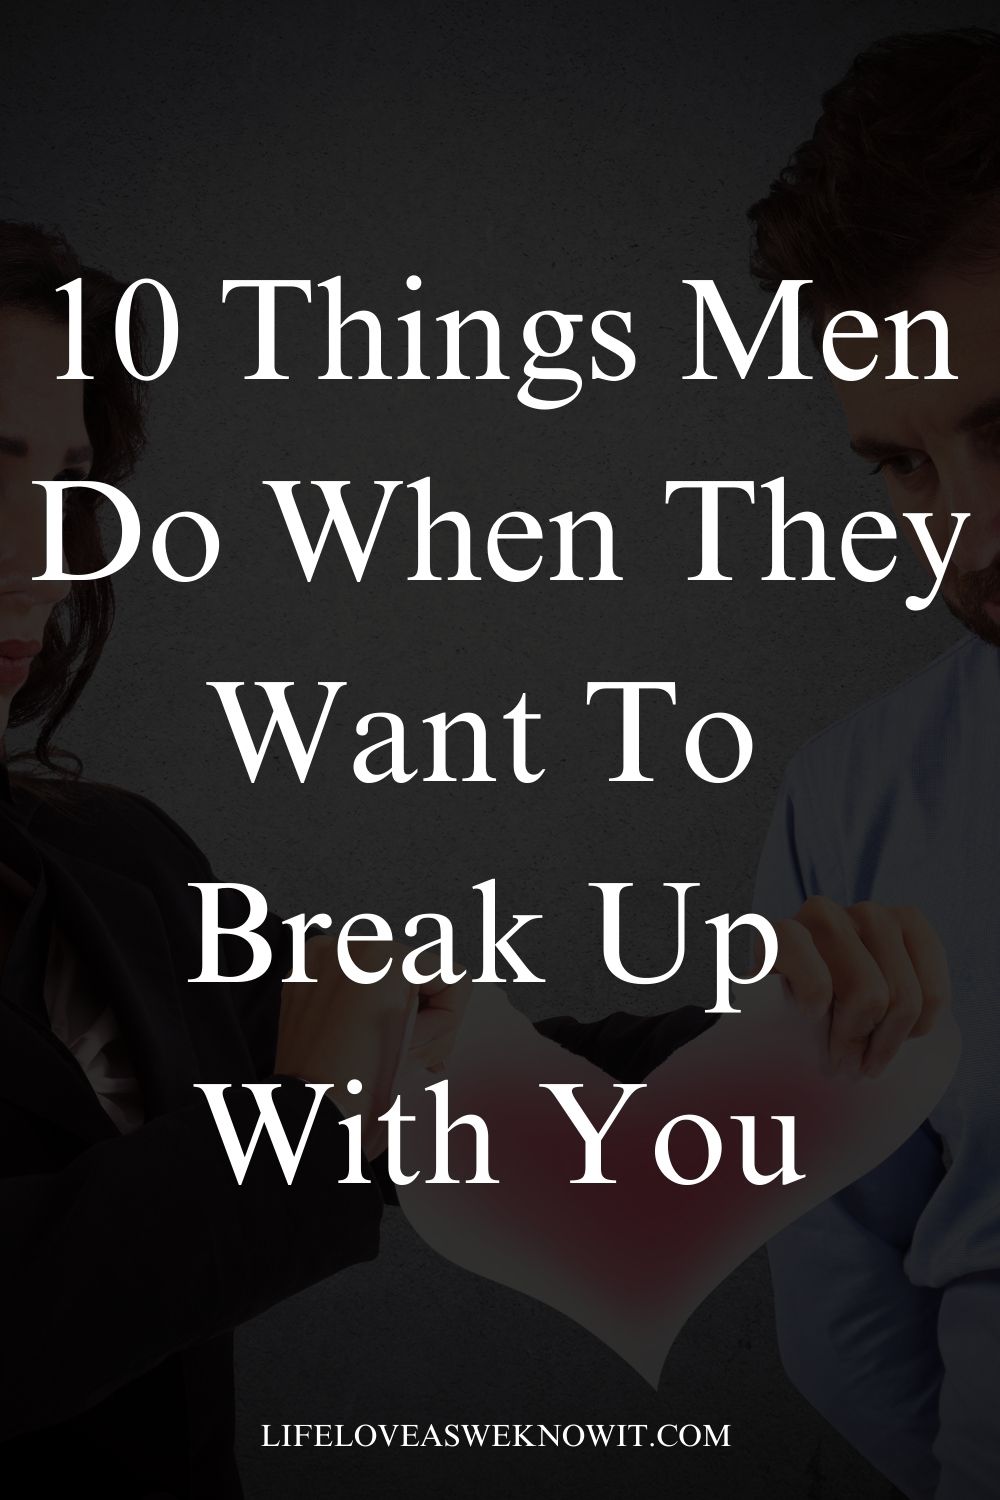 THINGS GUYS DO WHEN THEY WANT TO BREAK UP